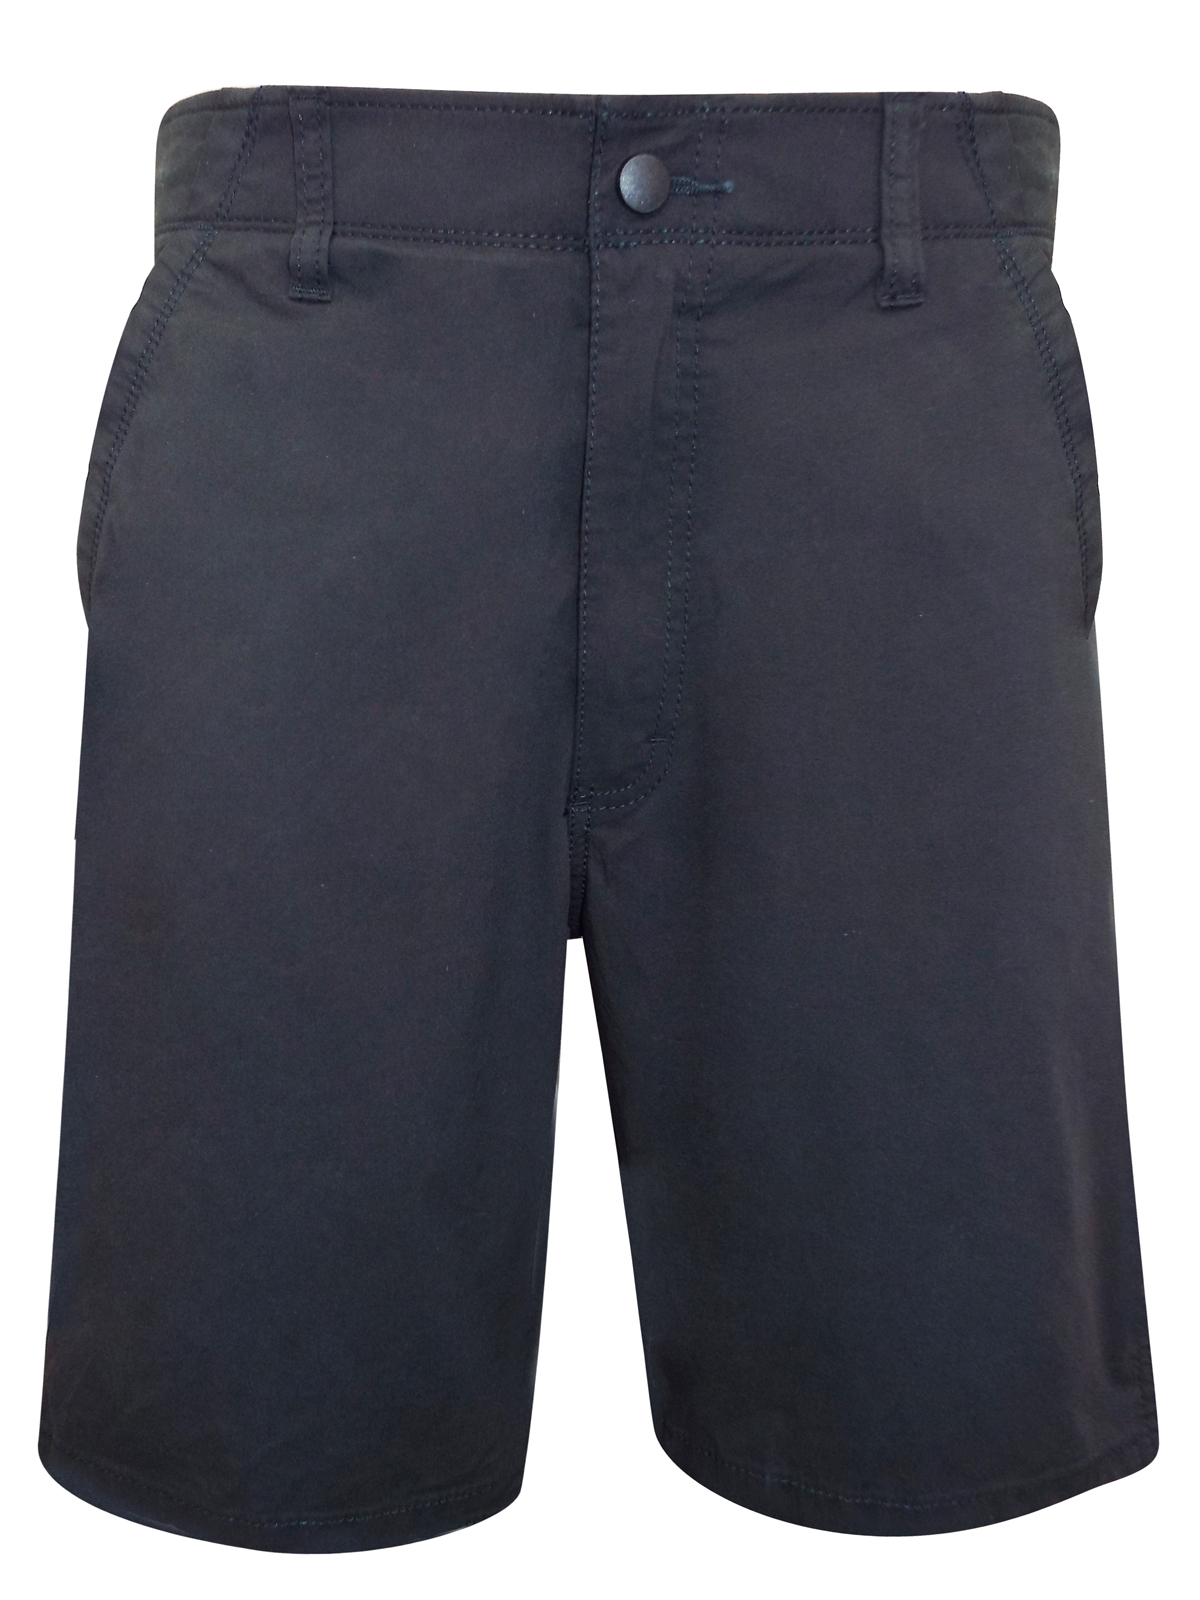 Wrangler - - Wr4ngler BLACK Pure Cotton Twill Shorts - Waist Size 32 to 44